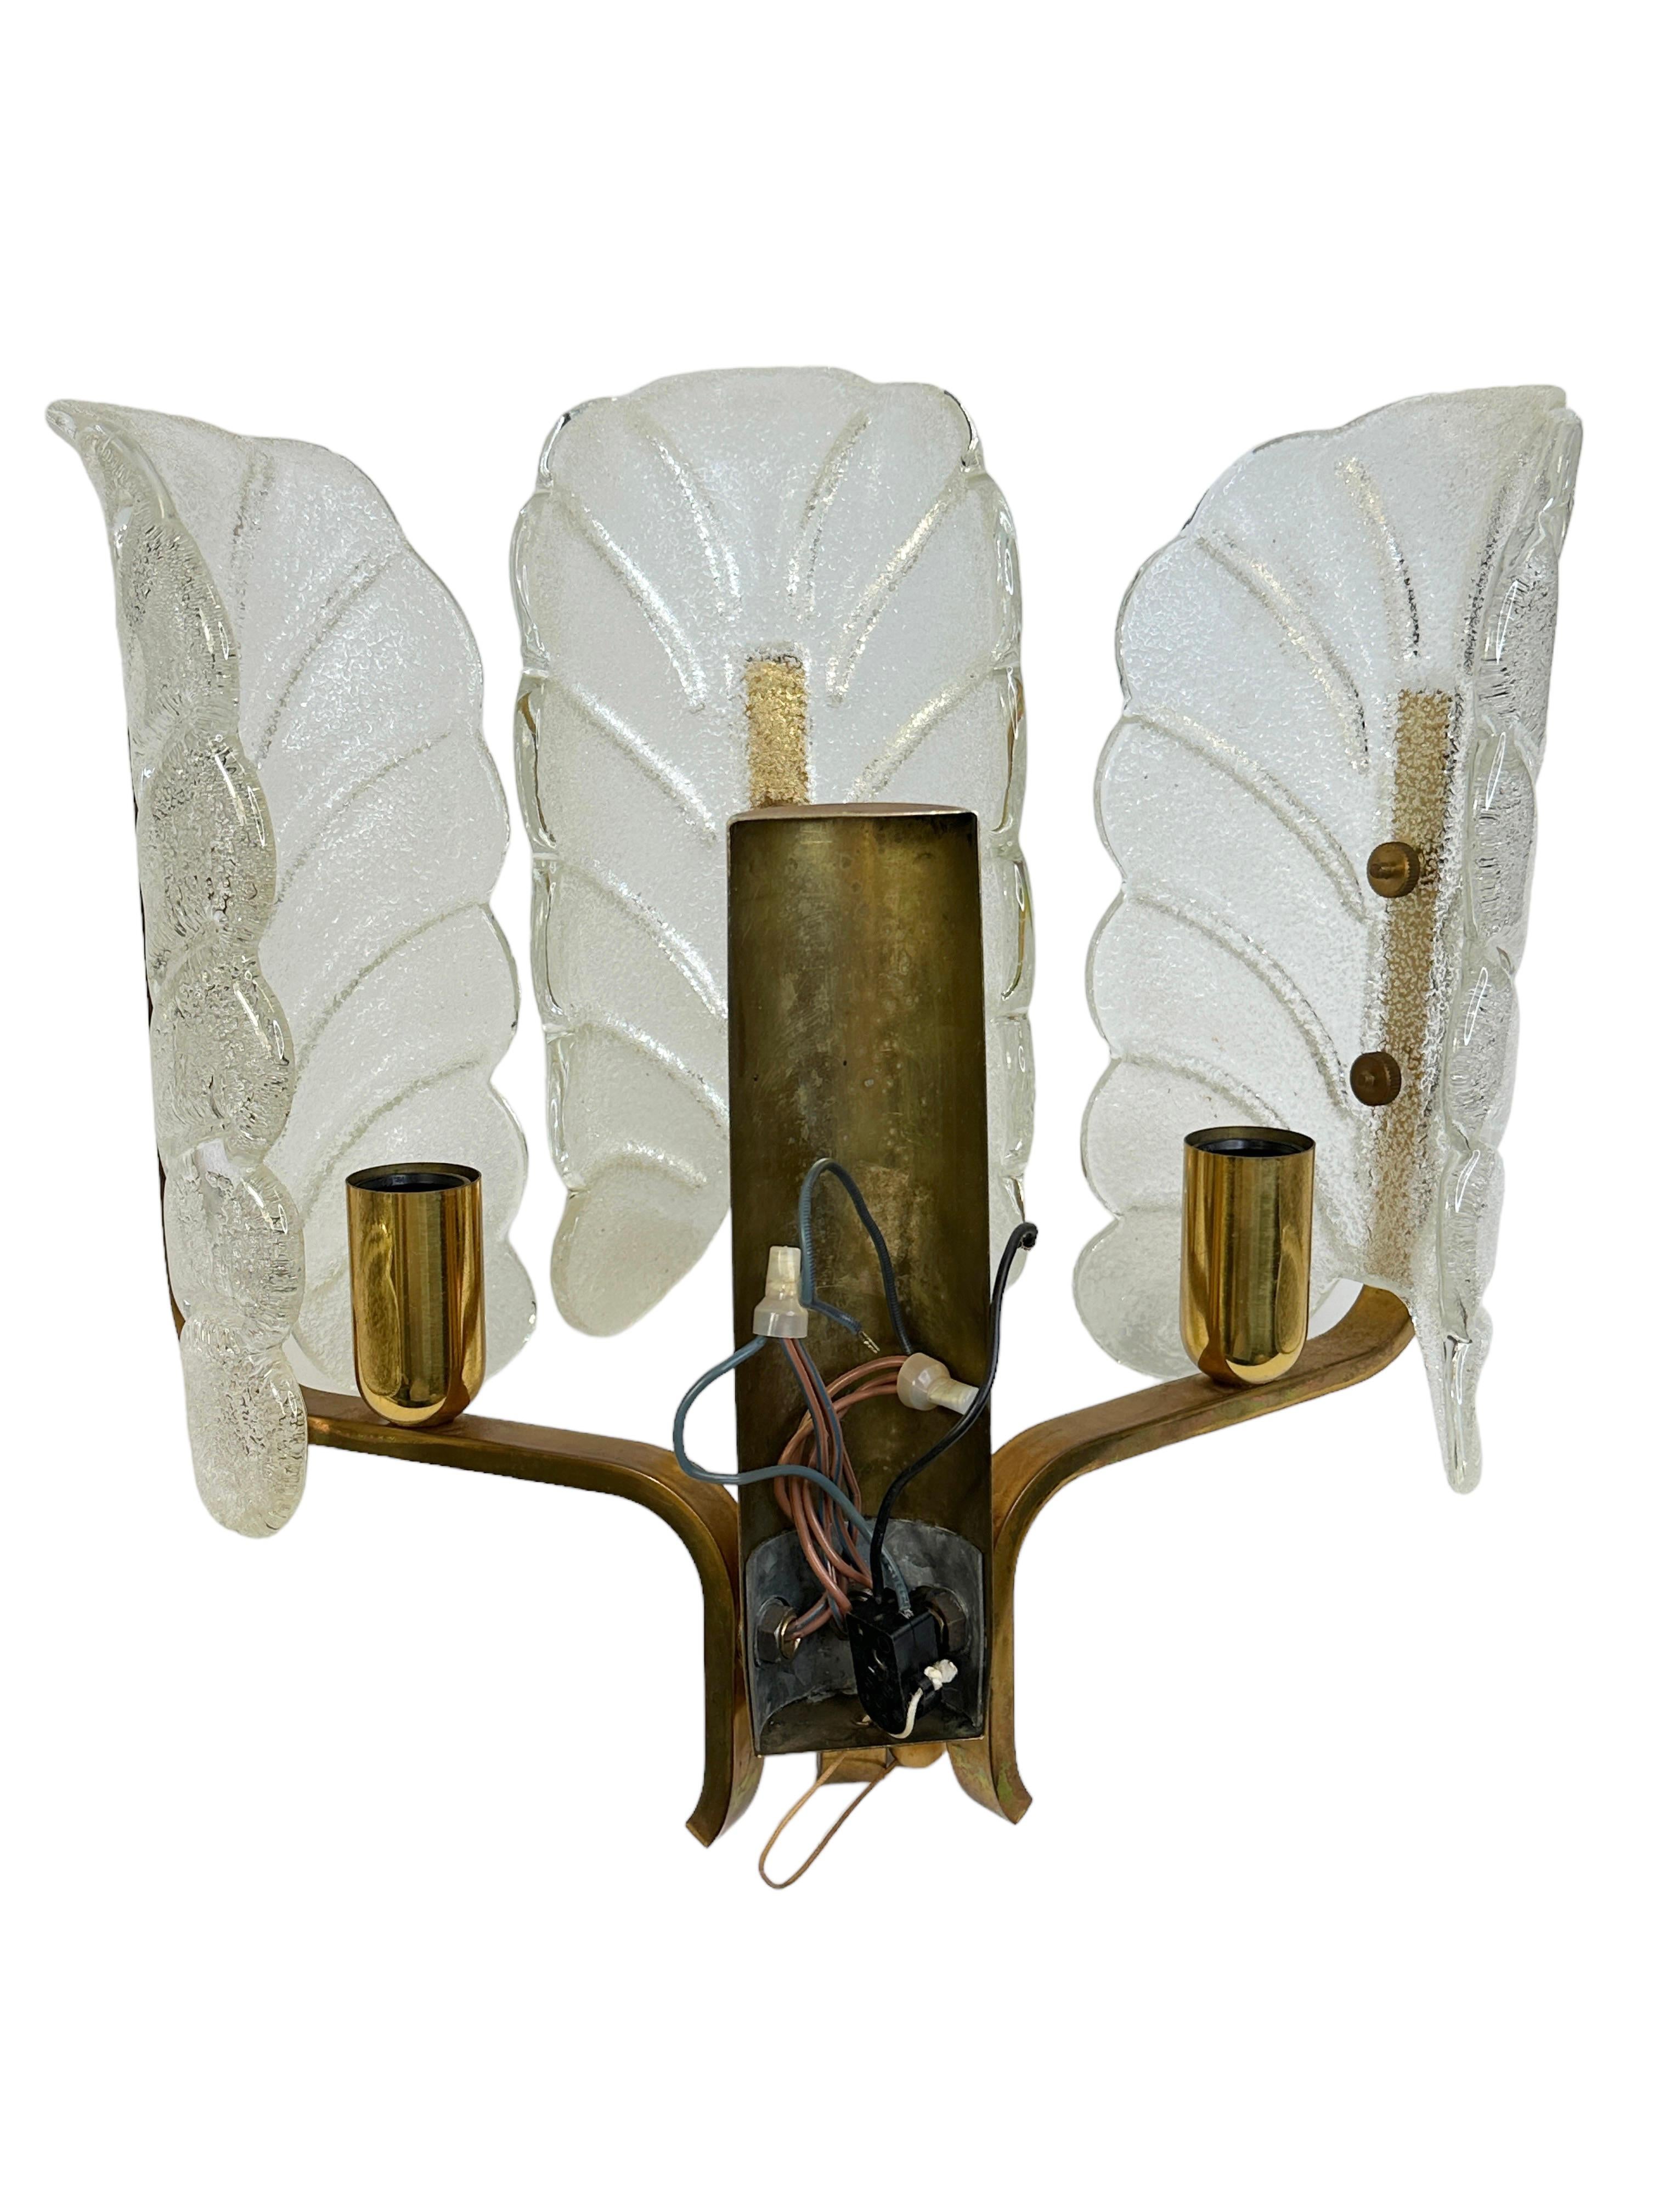 Swedish Glass and Brass 2 Light Sconce by Carl Fagerlund for Orrefors, Sweden 1960s For Sale